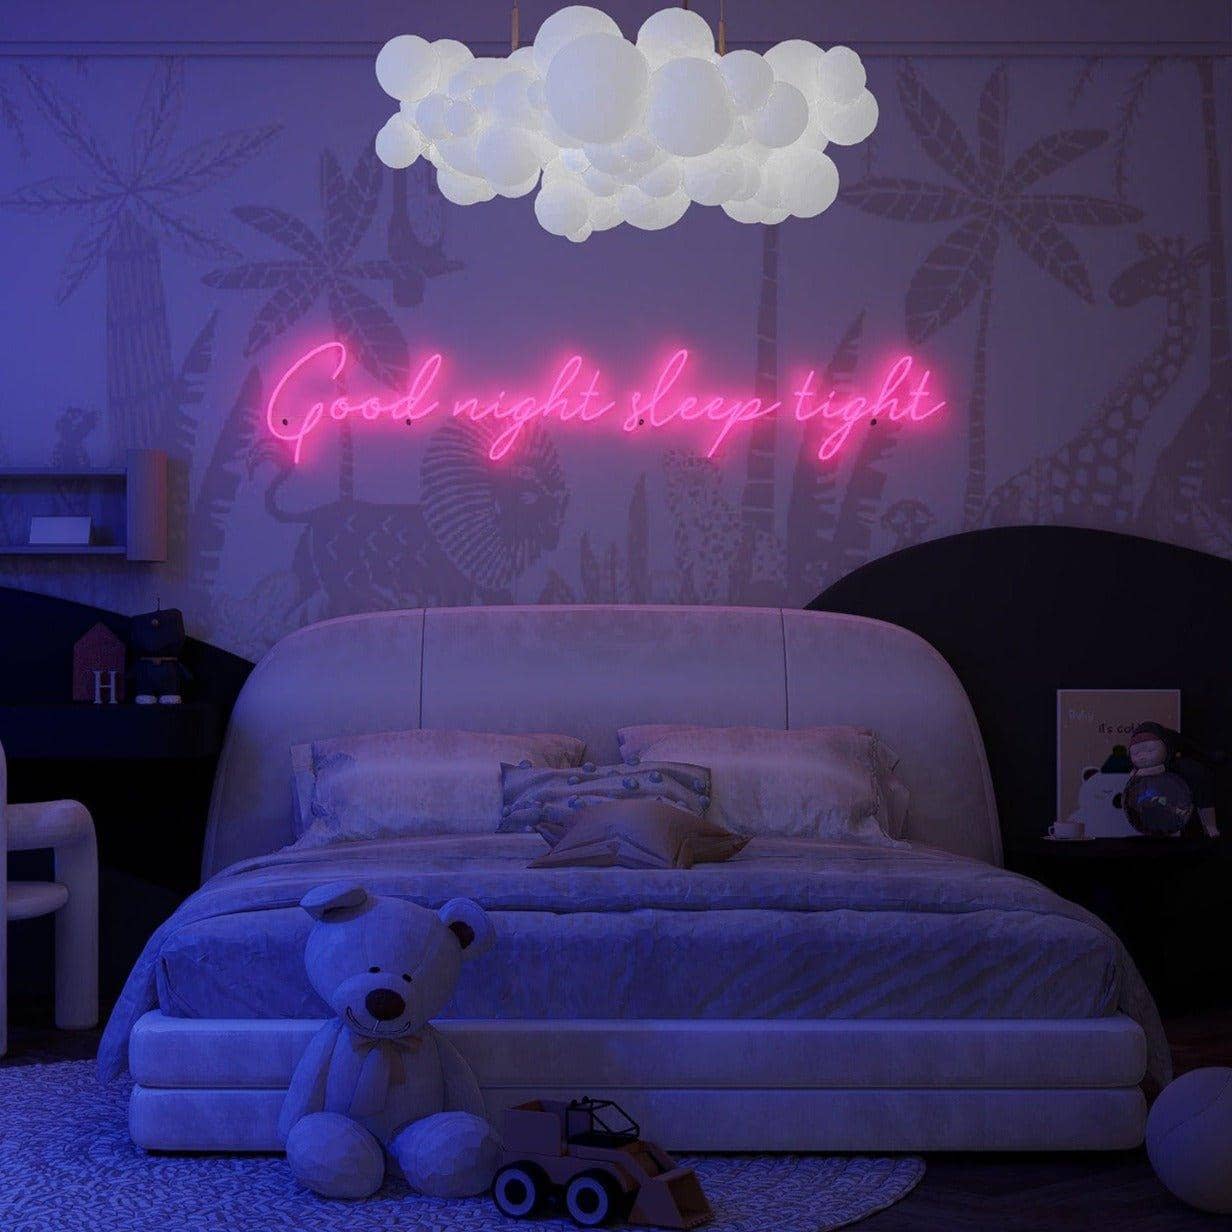 light-up-pink-neon-picture-hanging-on-the-wall-for-display-at-night-good-night-sleep-tight